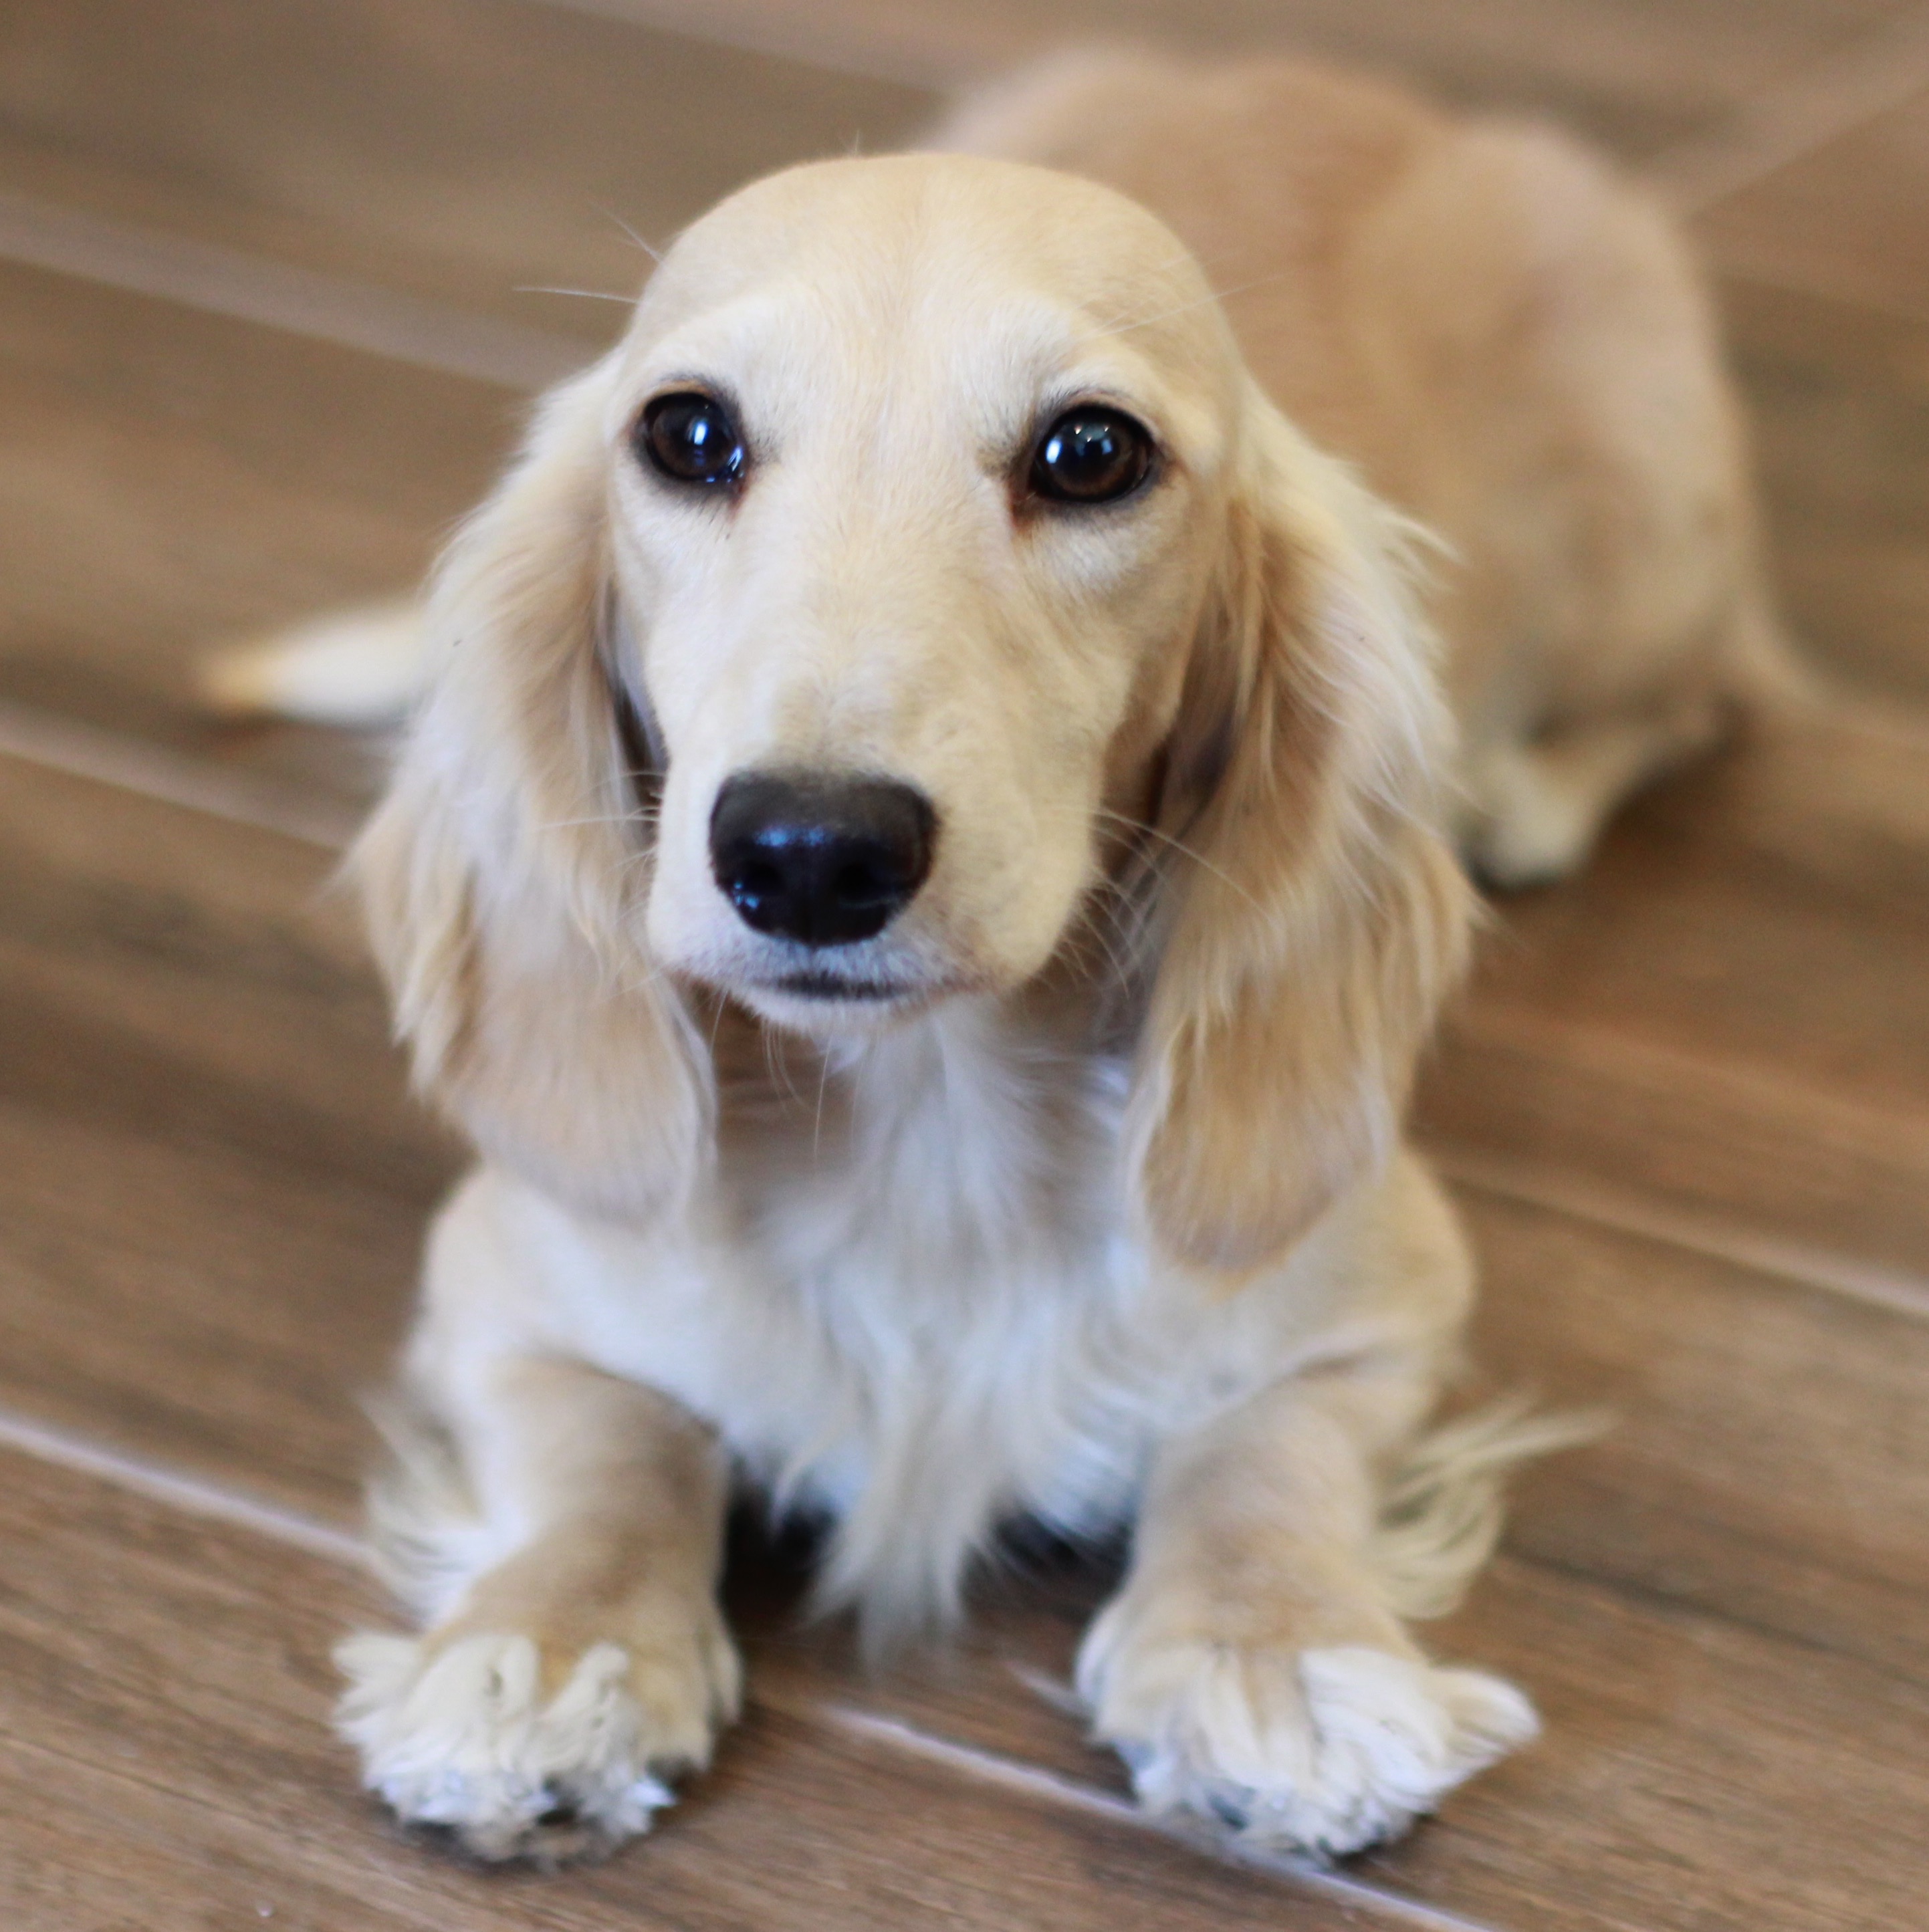 About English Cream Dachshunds Crown Dachshunds